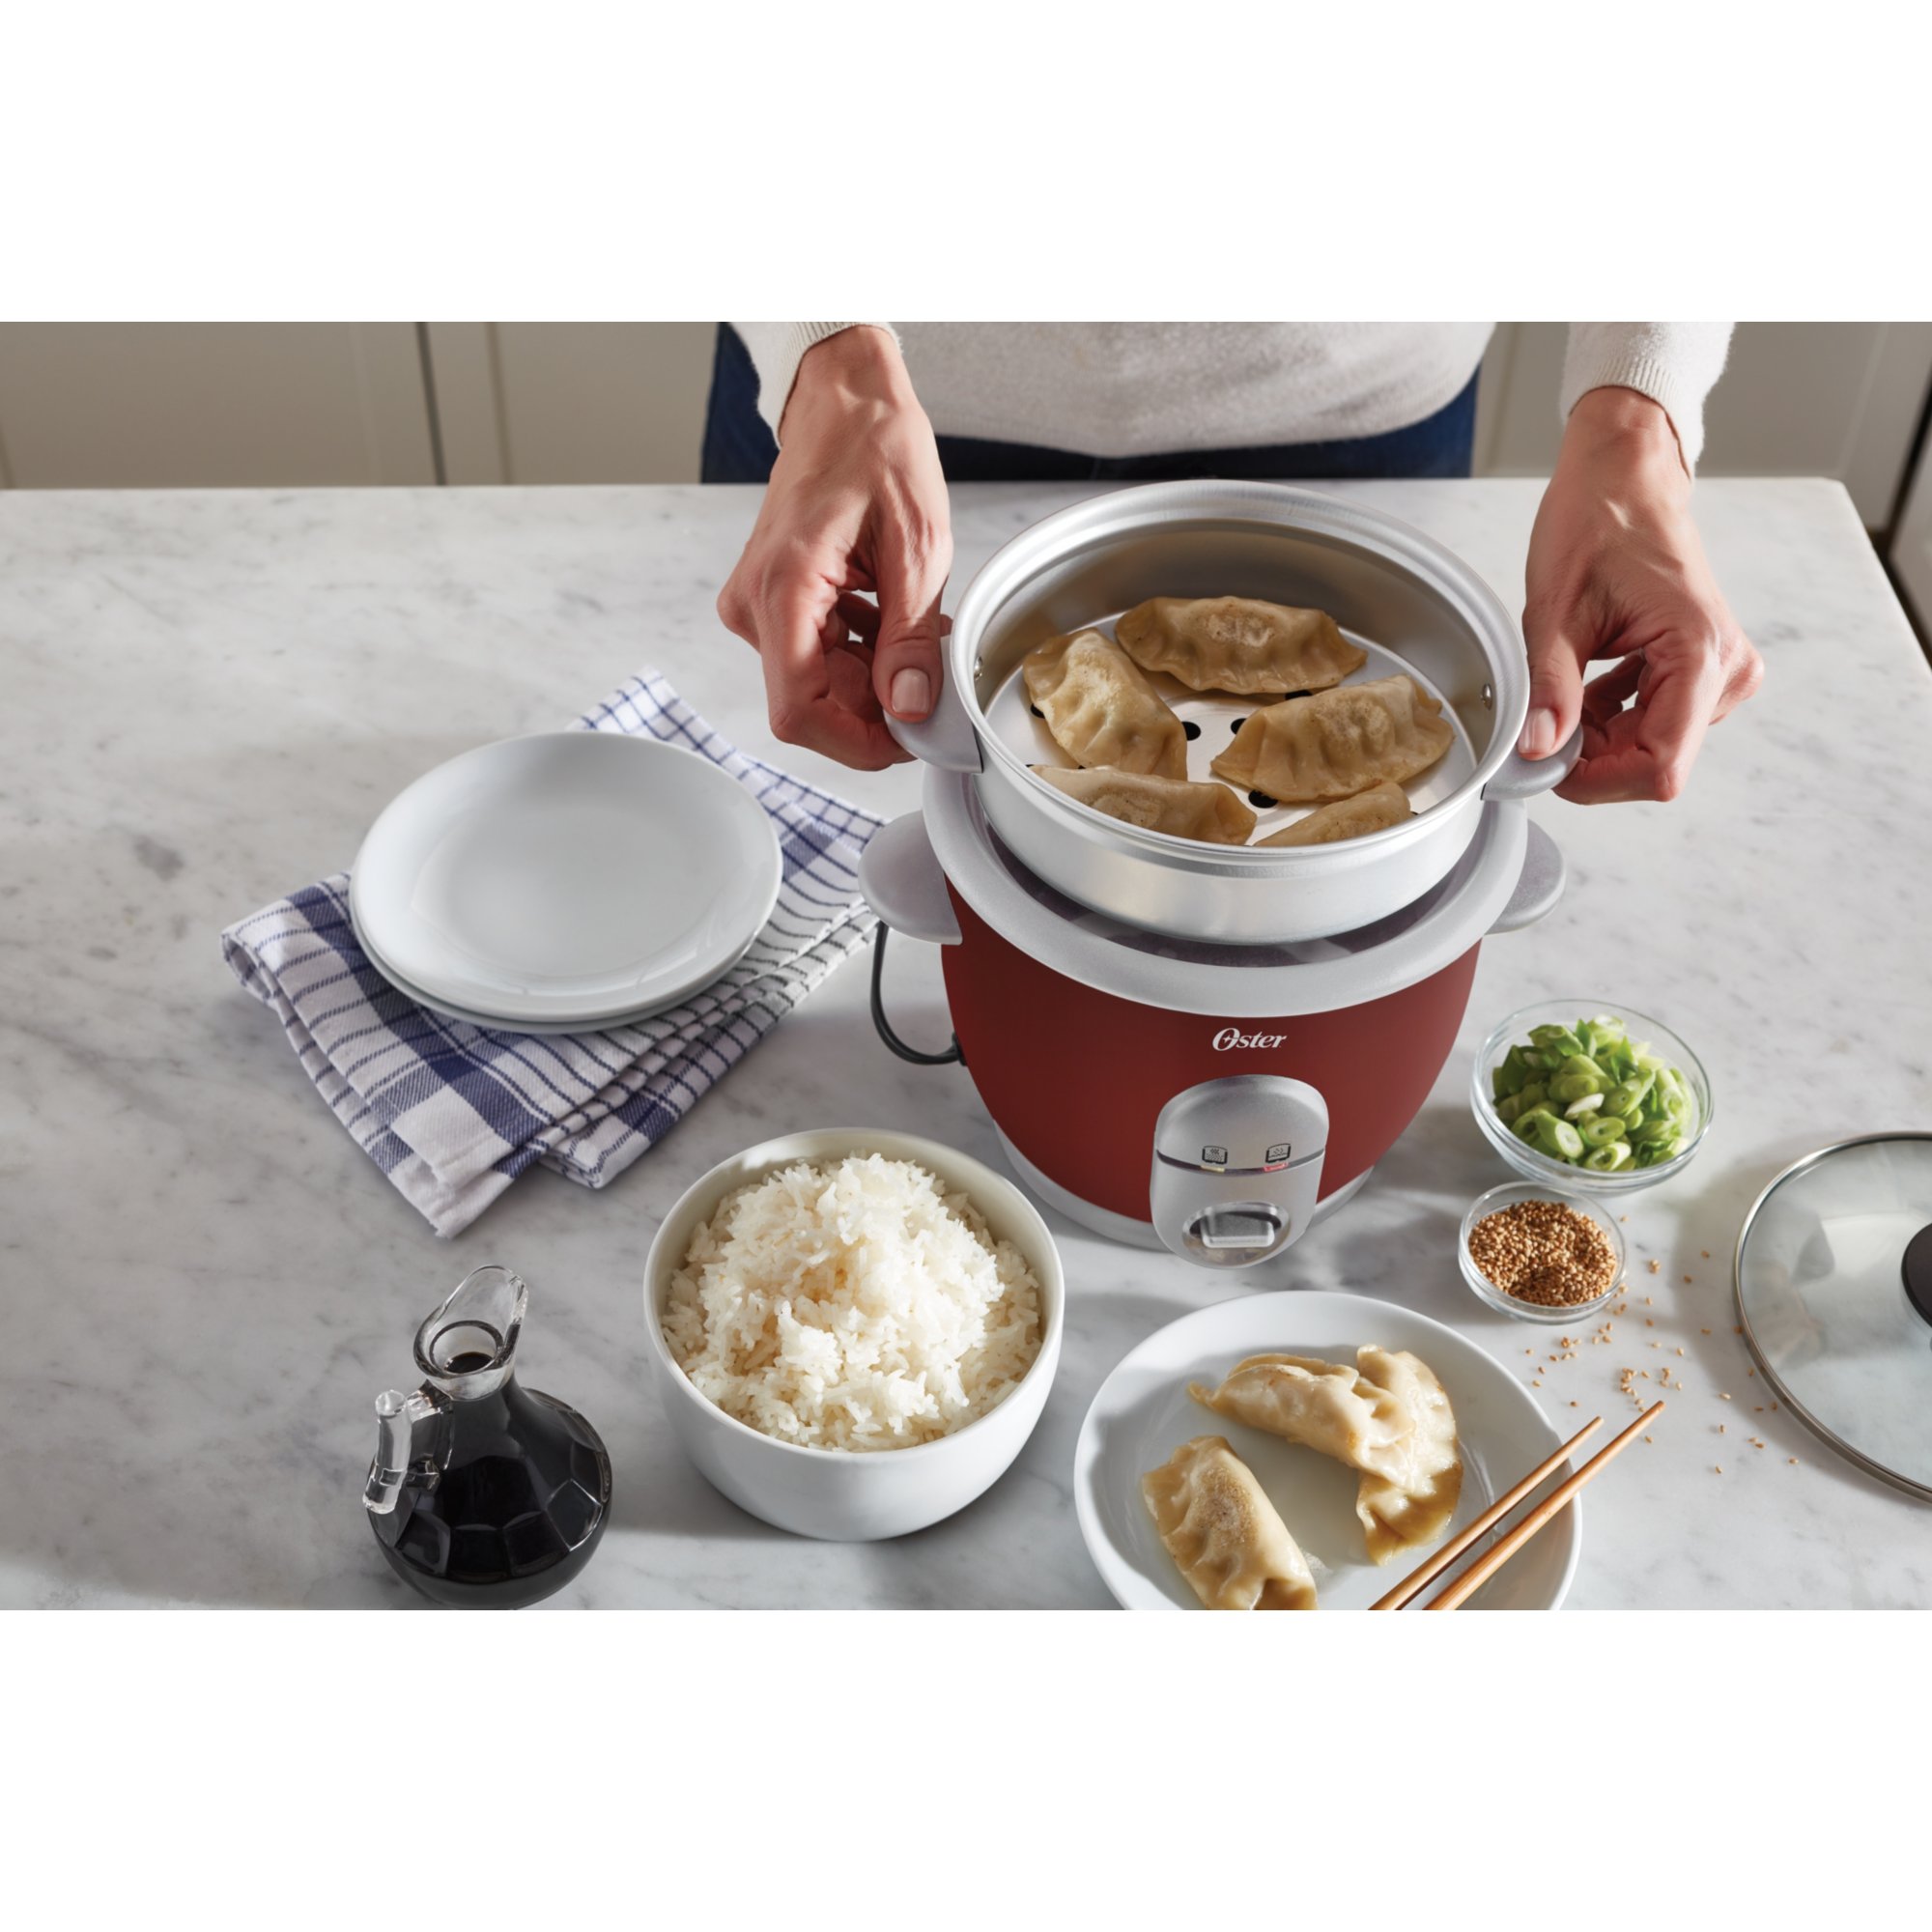 https://s7d9.scene7.com/is/image/NewellRubbermaid/4722000000-oster-rice-cooker-with-steamer-red-top-down-with-food-lifestyle-with-talent-1?wid=2000&hei=2000